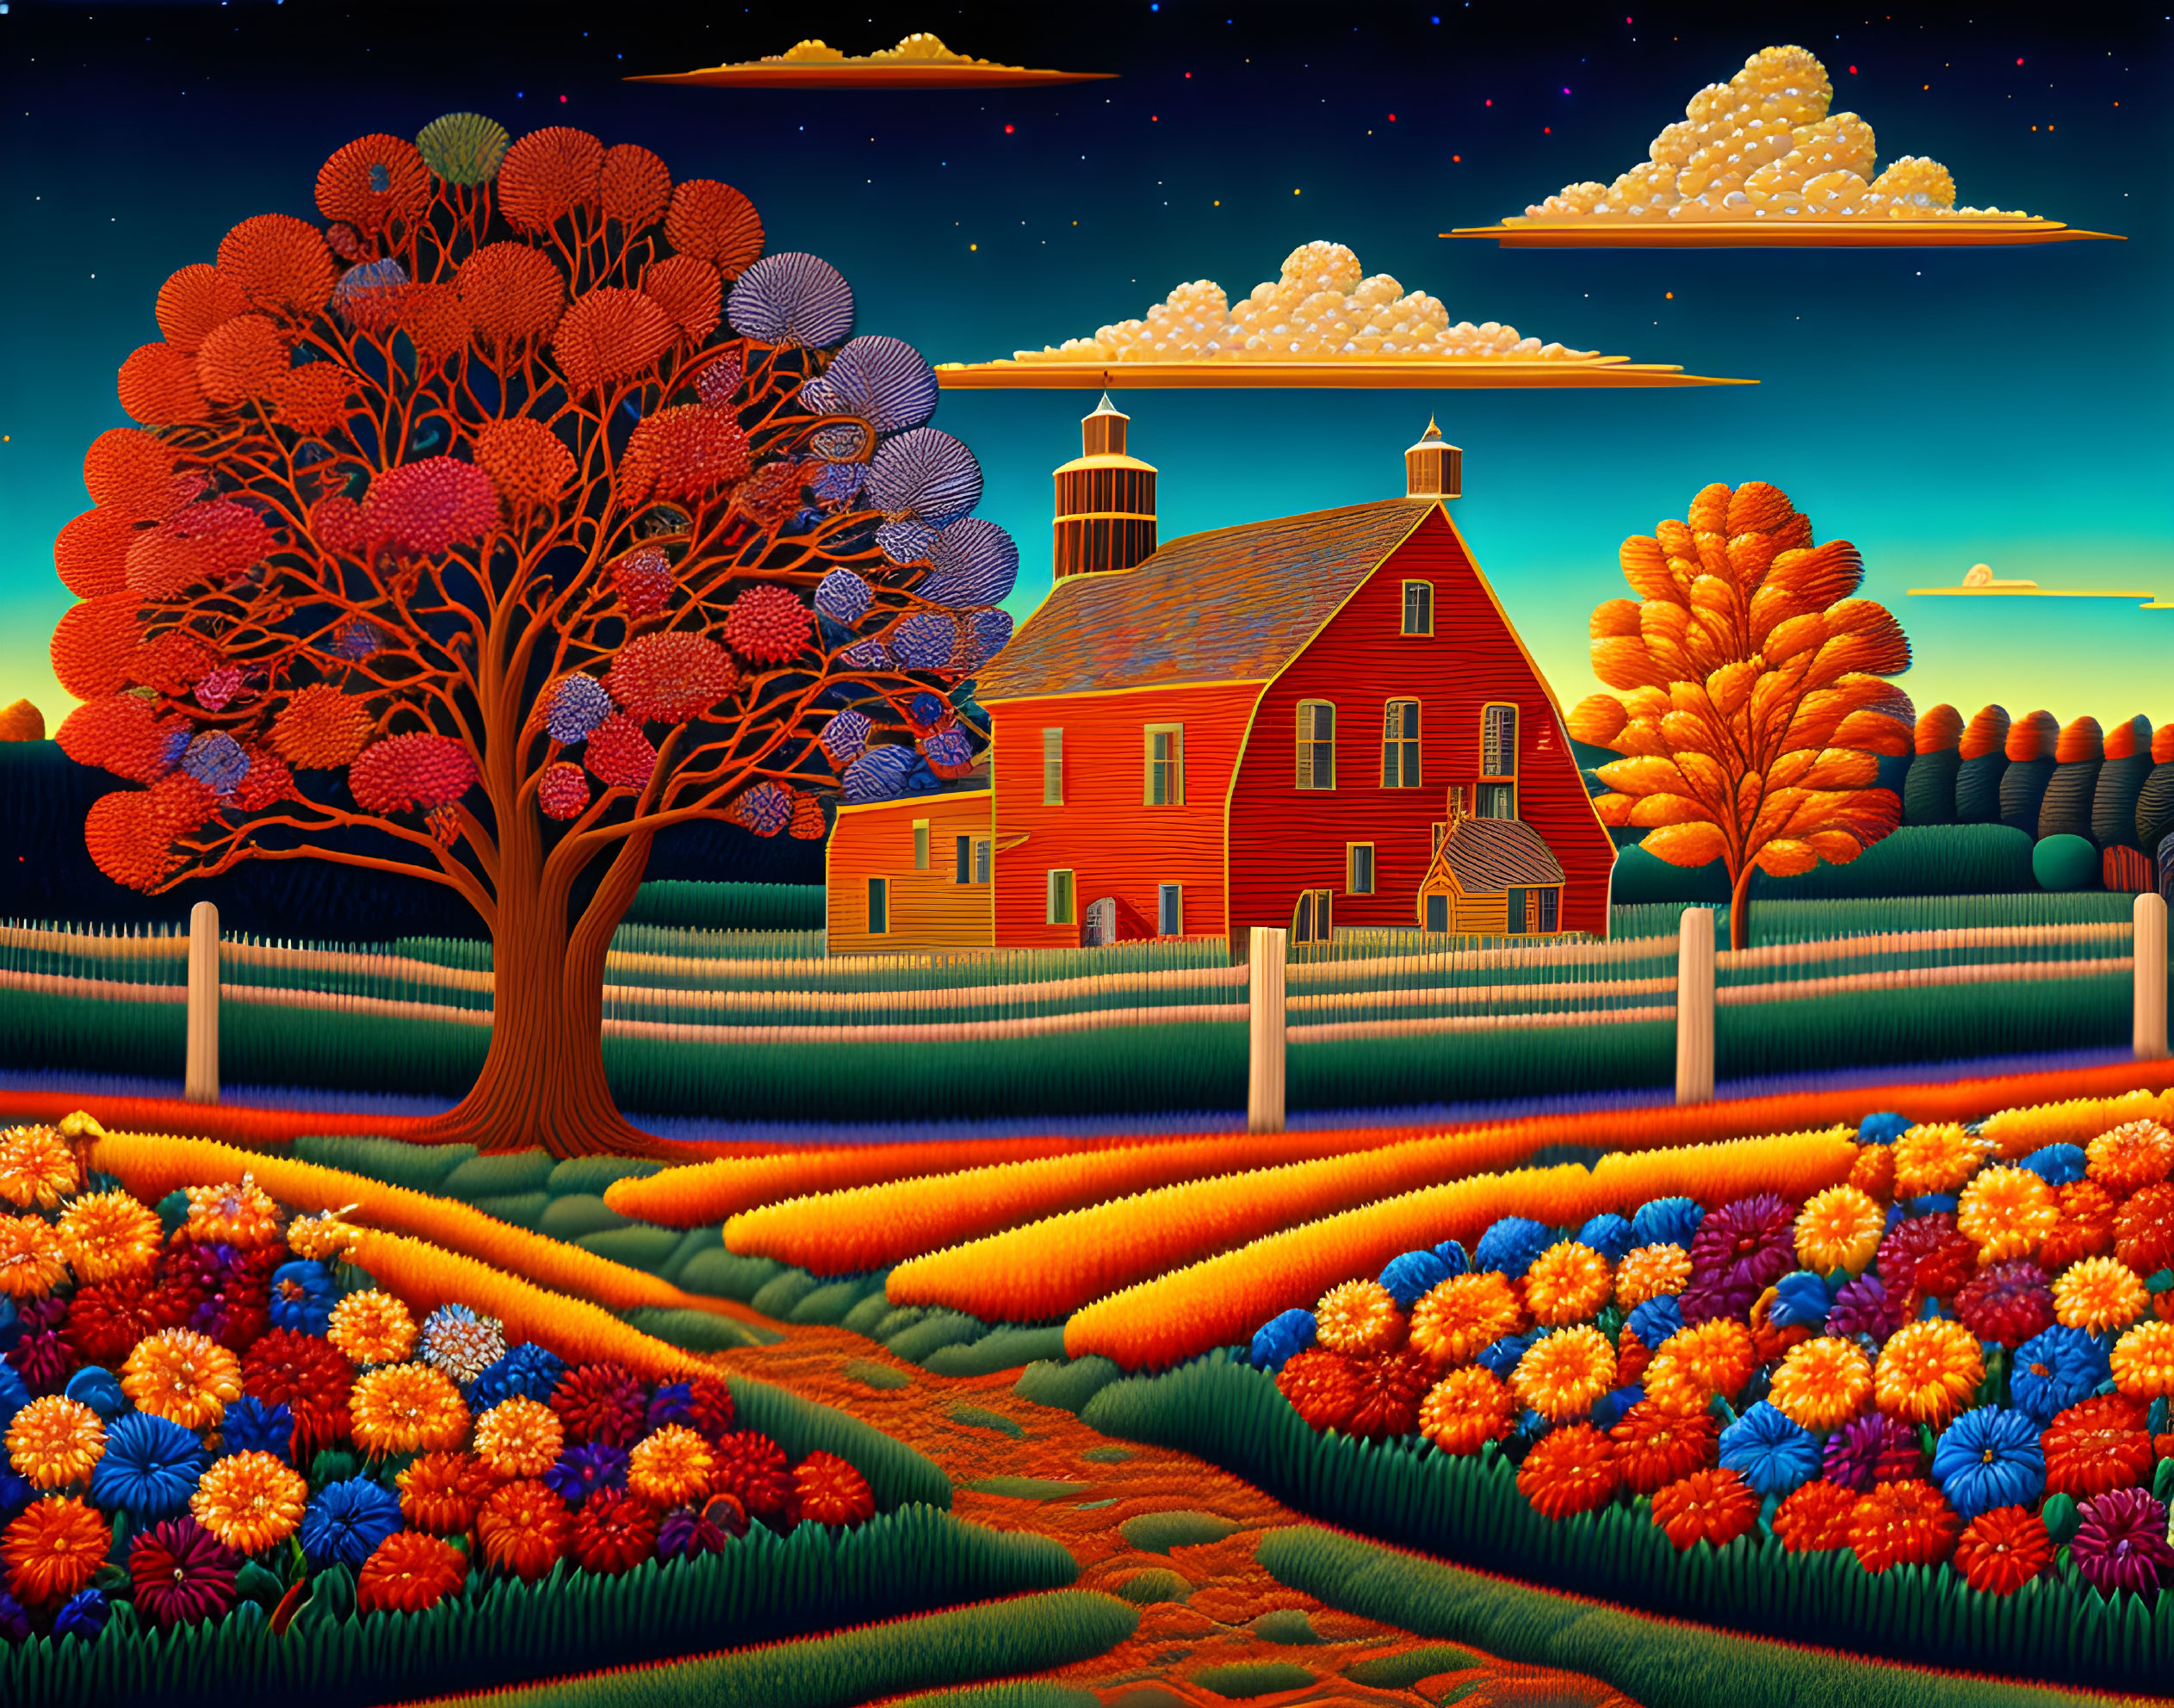 Colorful Stylized Landscape with Red Barn and Multicolored Tree